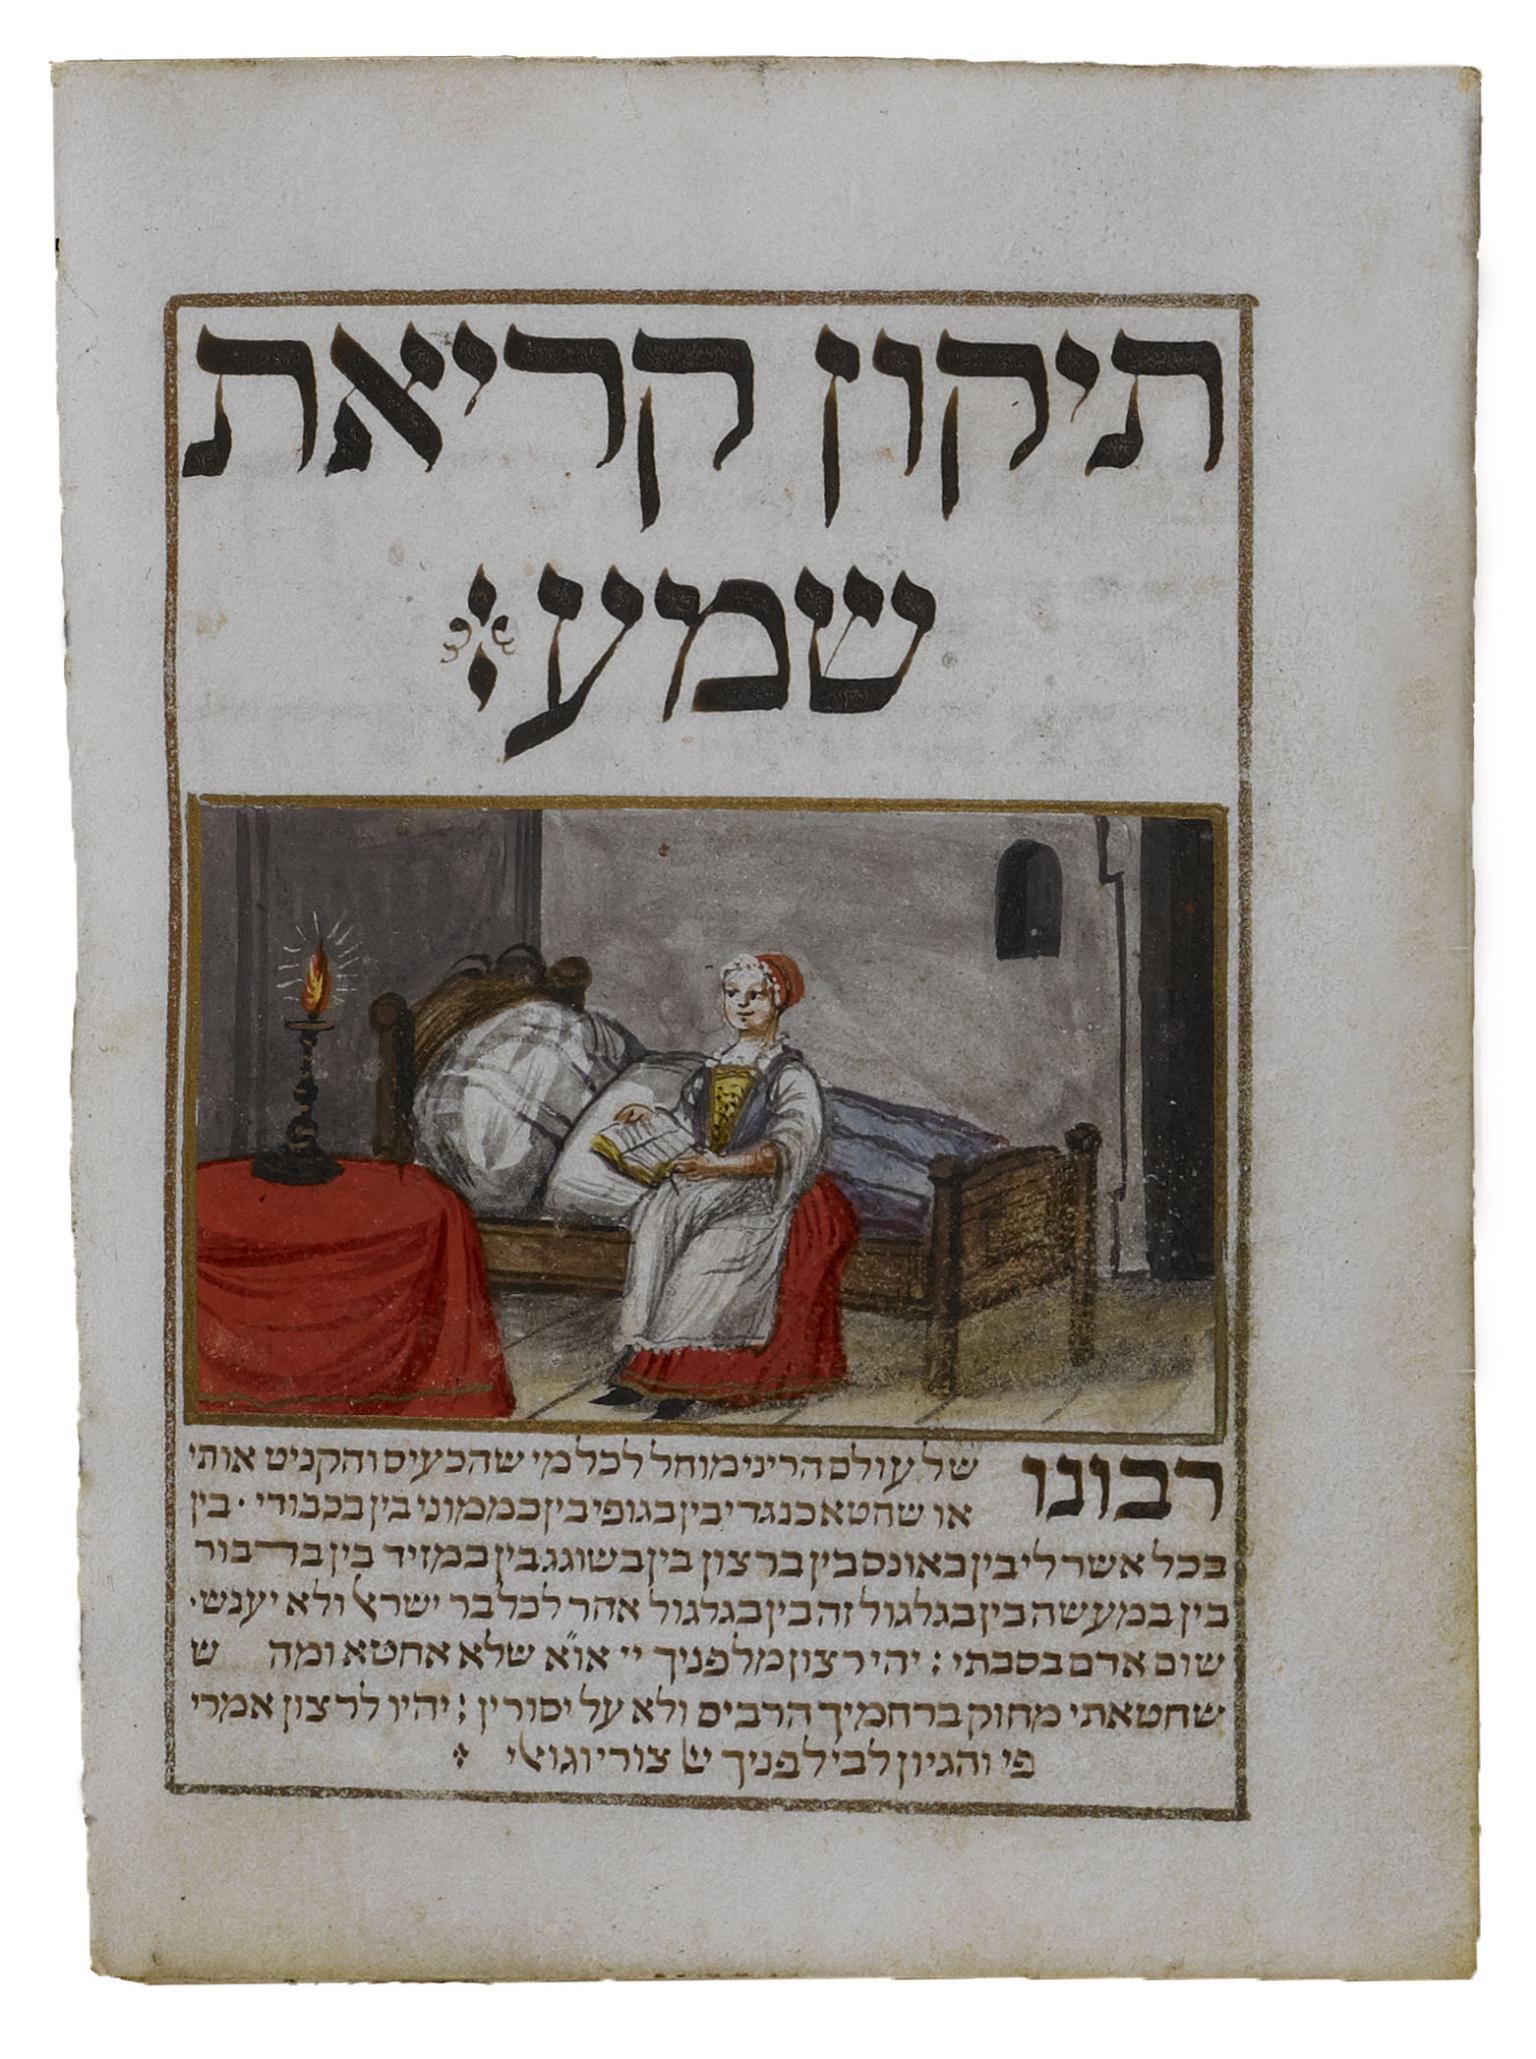 Manuscript page of Hebrew text with illustration of woman sitting on bed holding a book by candlelight. 